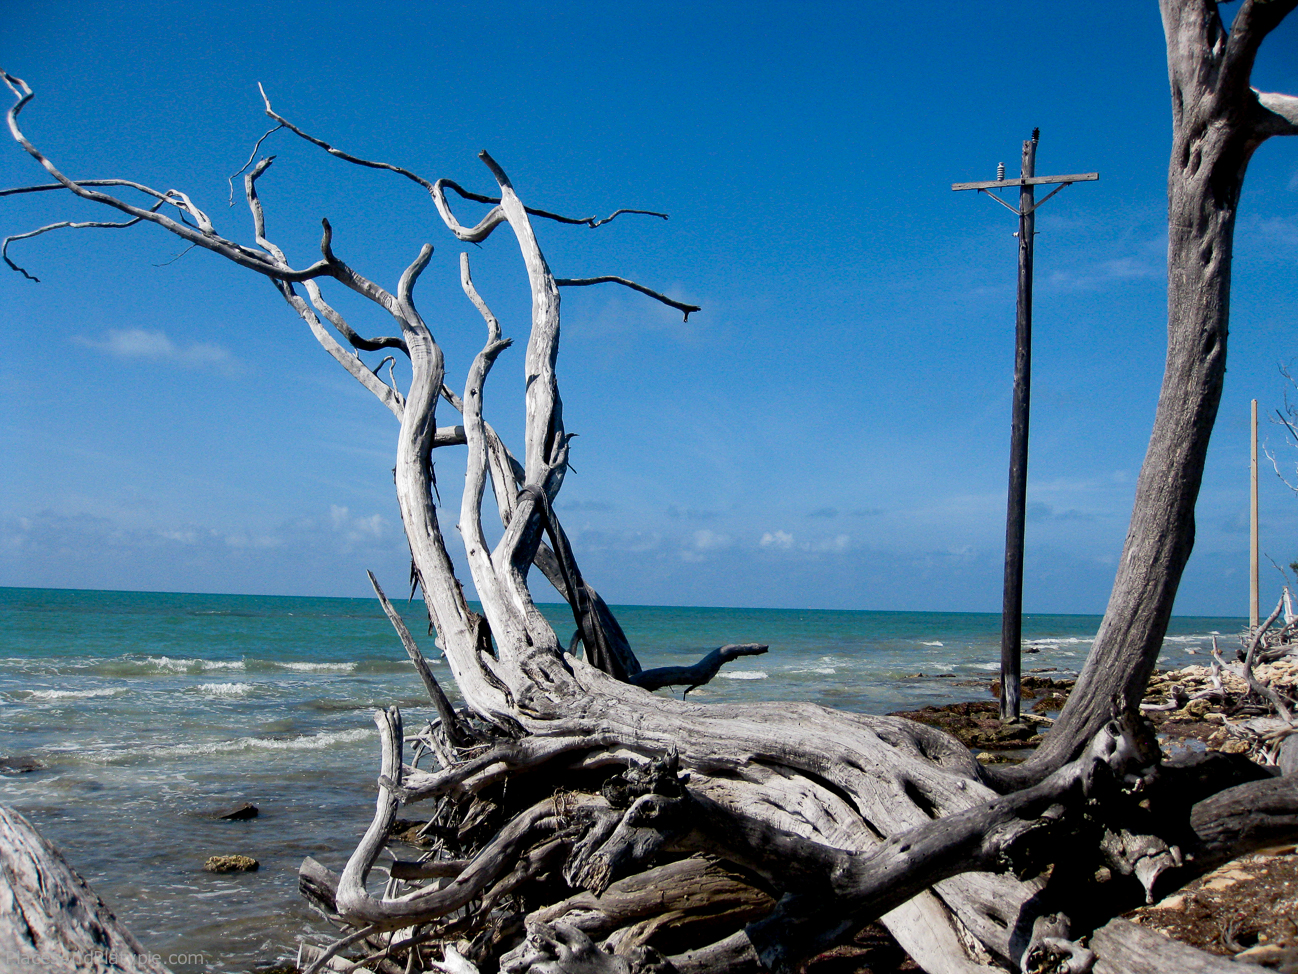 The broken remains of old US Route 1 lie under the surf on the Atlantic side of the Keys.